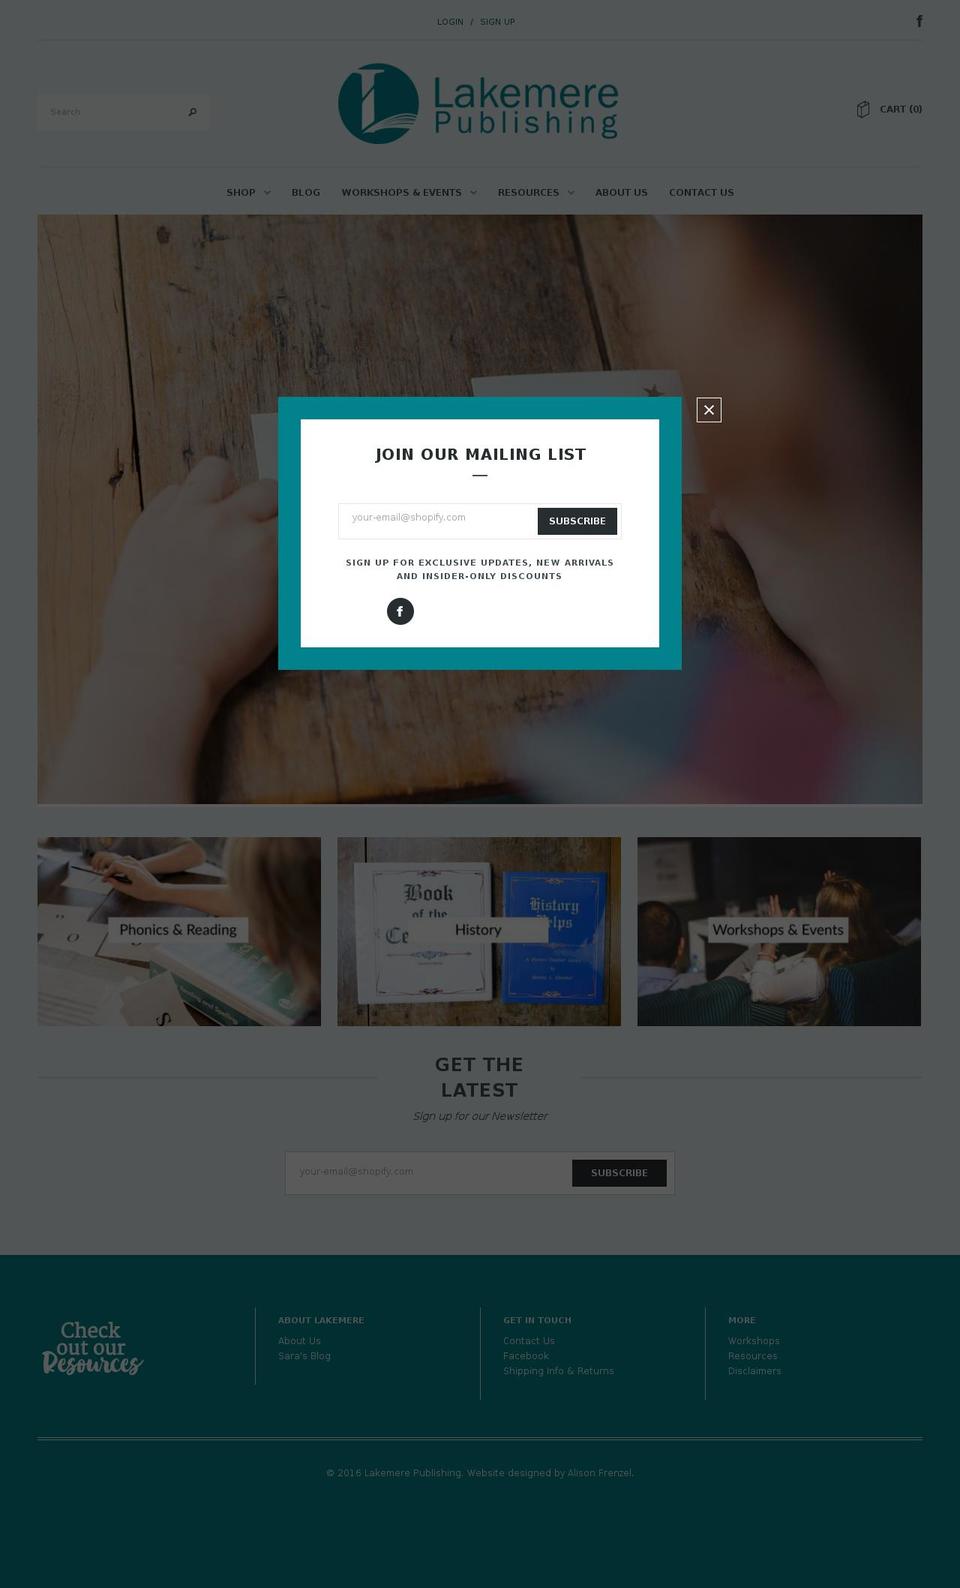 lakemere-myshopify-com-avenues-1-1-8 Shopify theme site example lakemereed.com